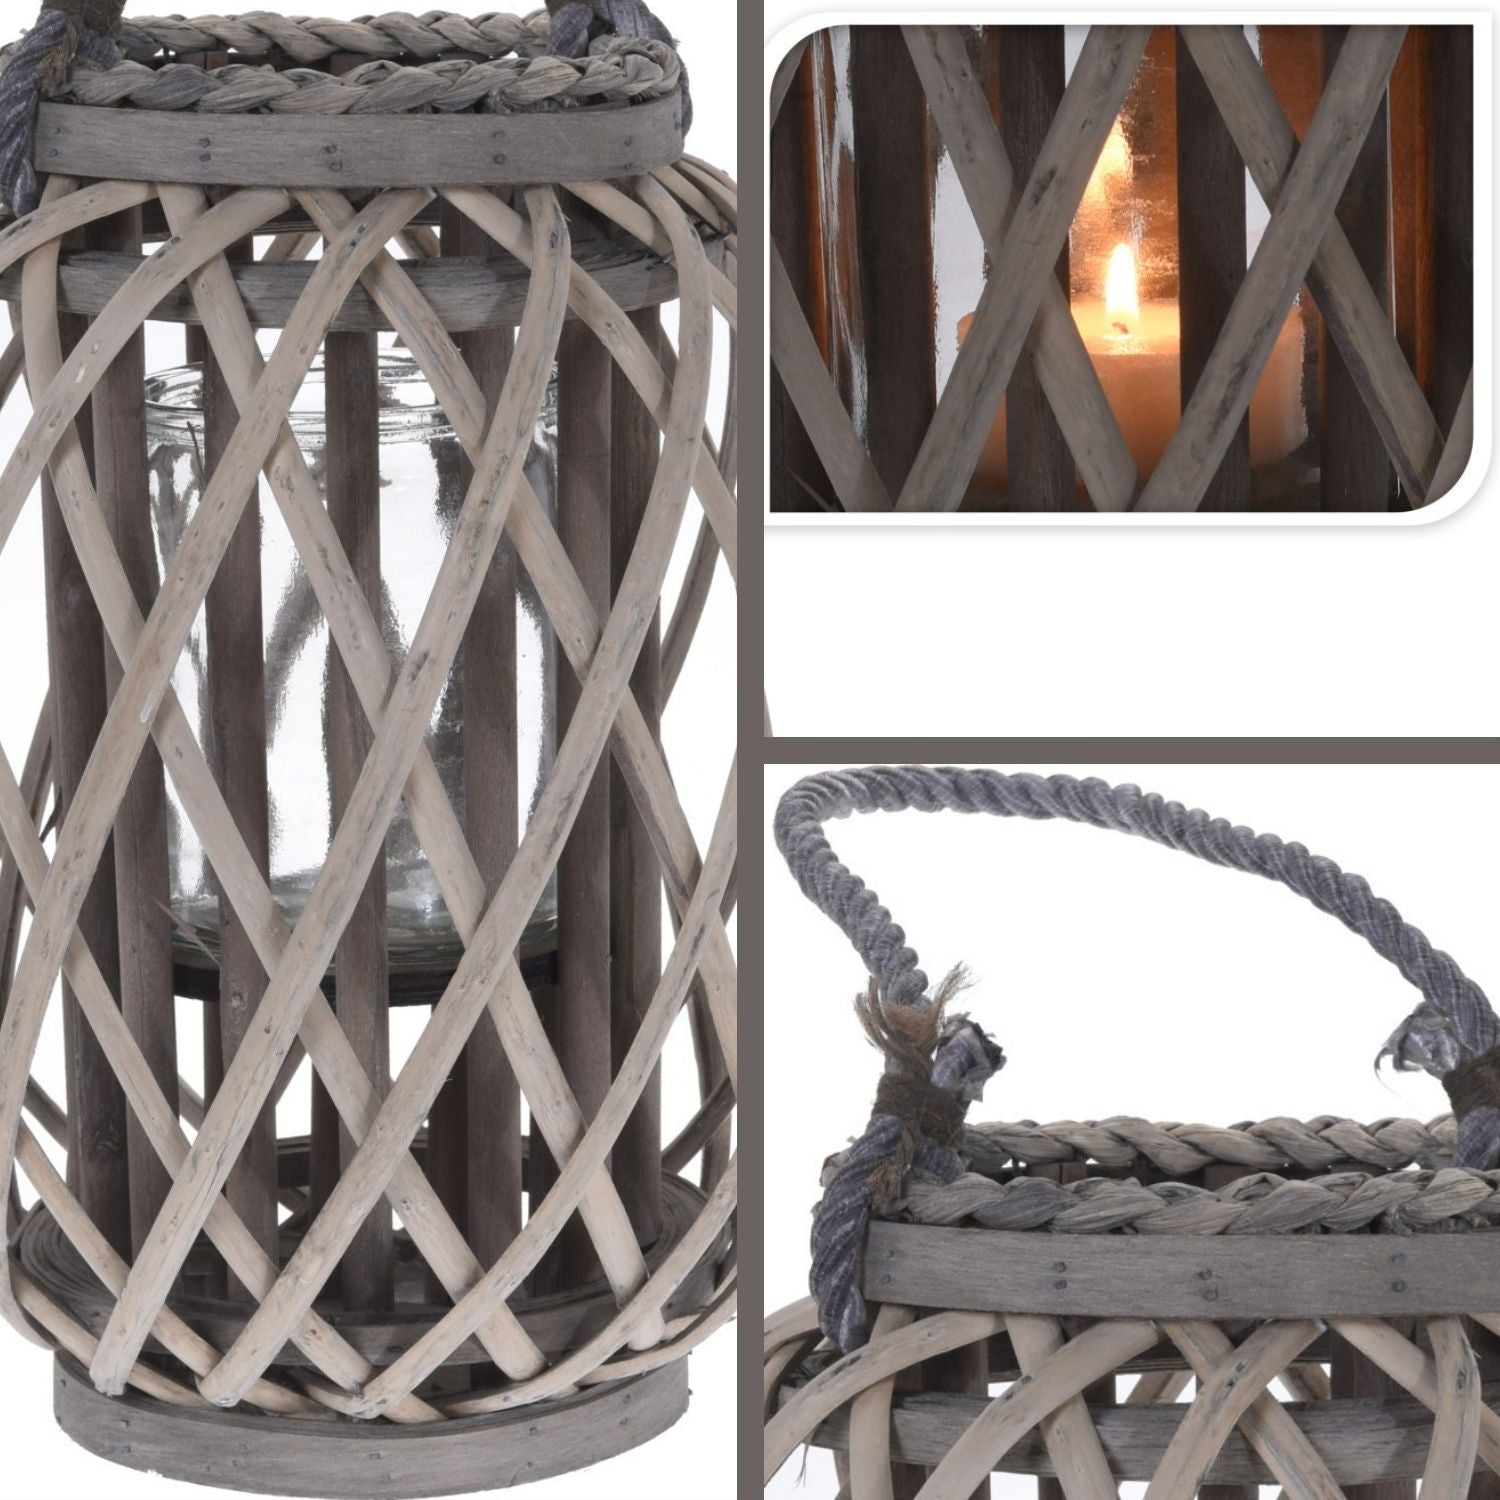 The Home Collection Lantern - Split Willow 2 Shaws Department Stores